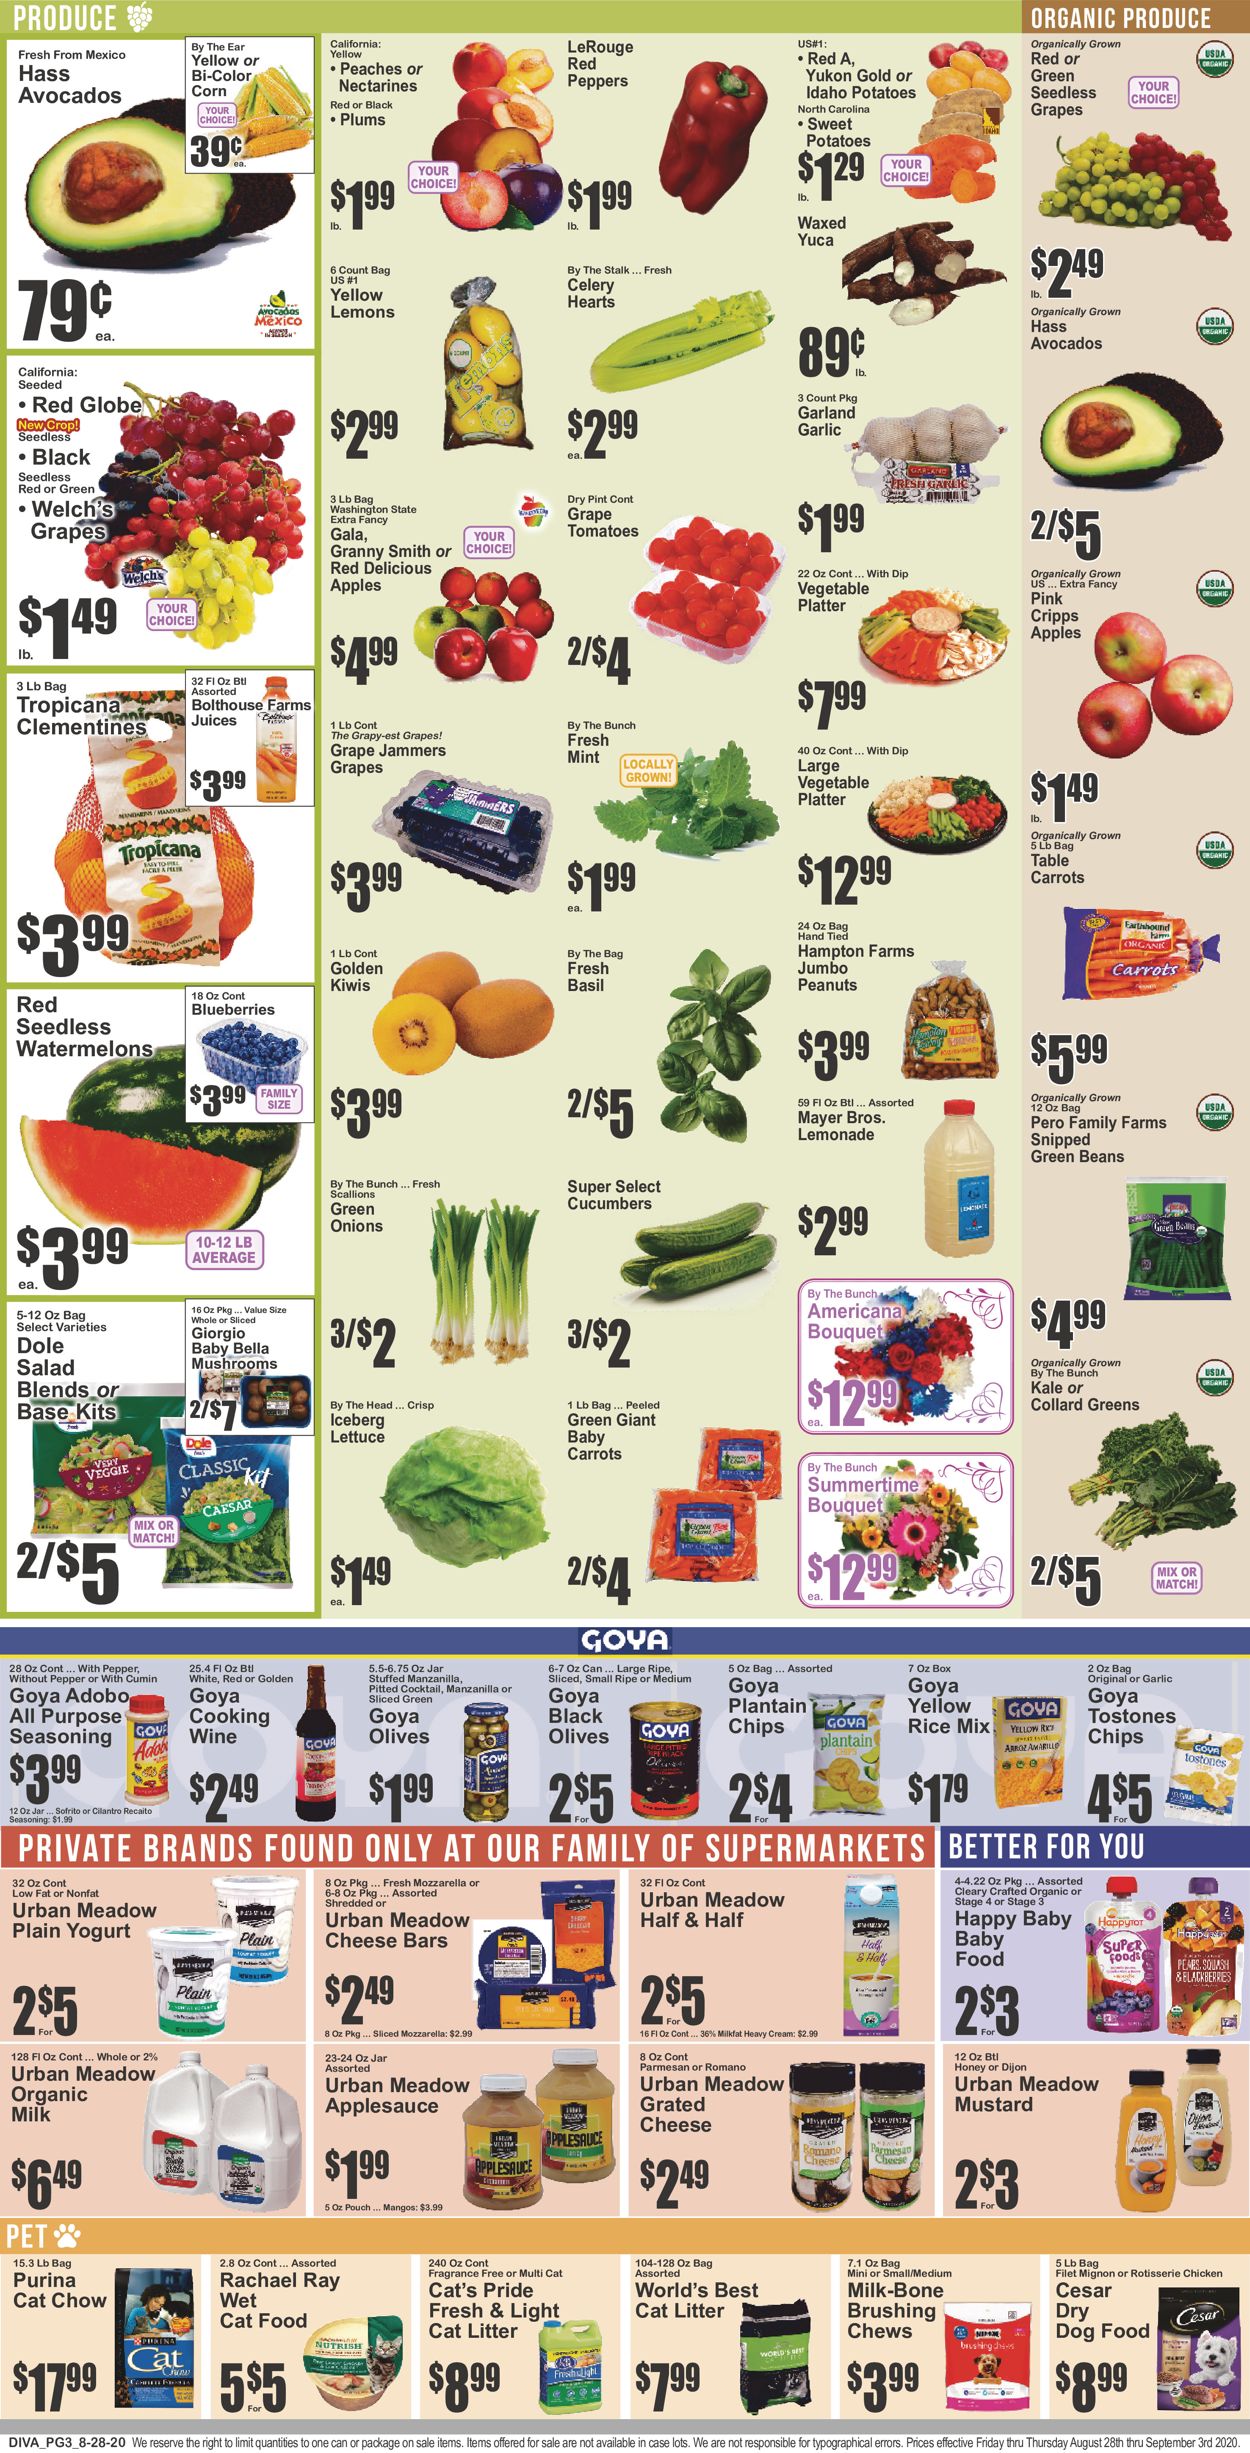 Key Food Ad from 08/28/2020